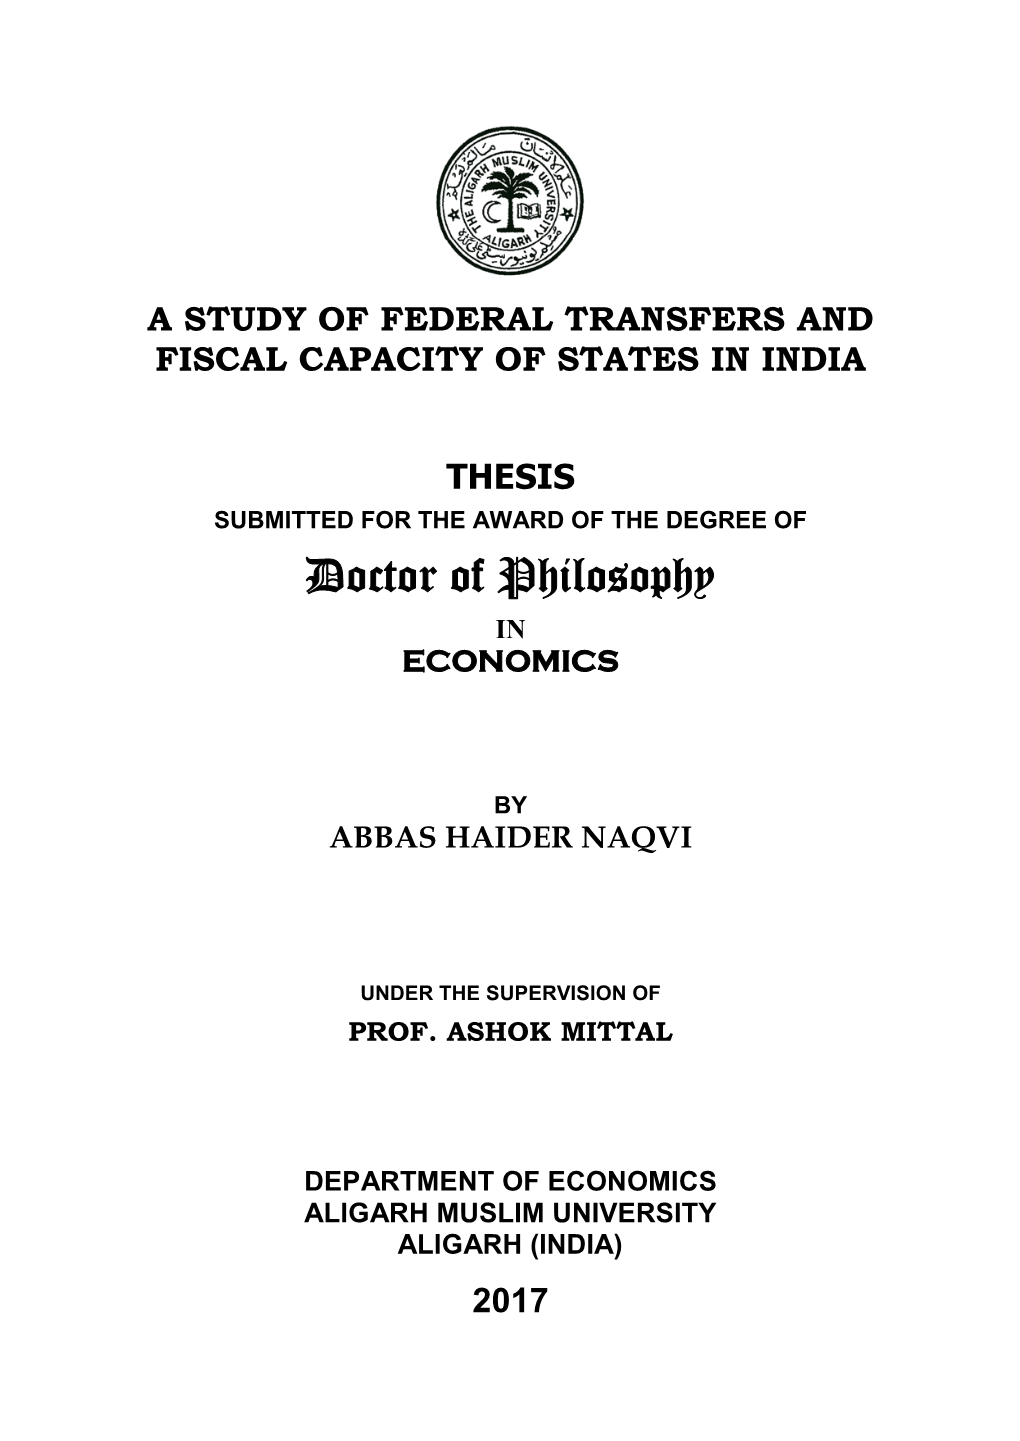 A Study of Federal Transfers and Fiscal Capacity of States in India Thesis